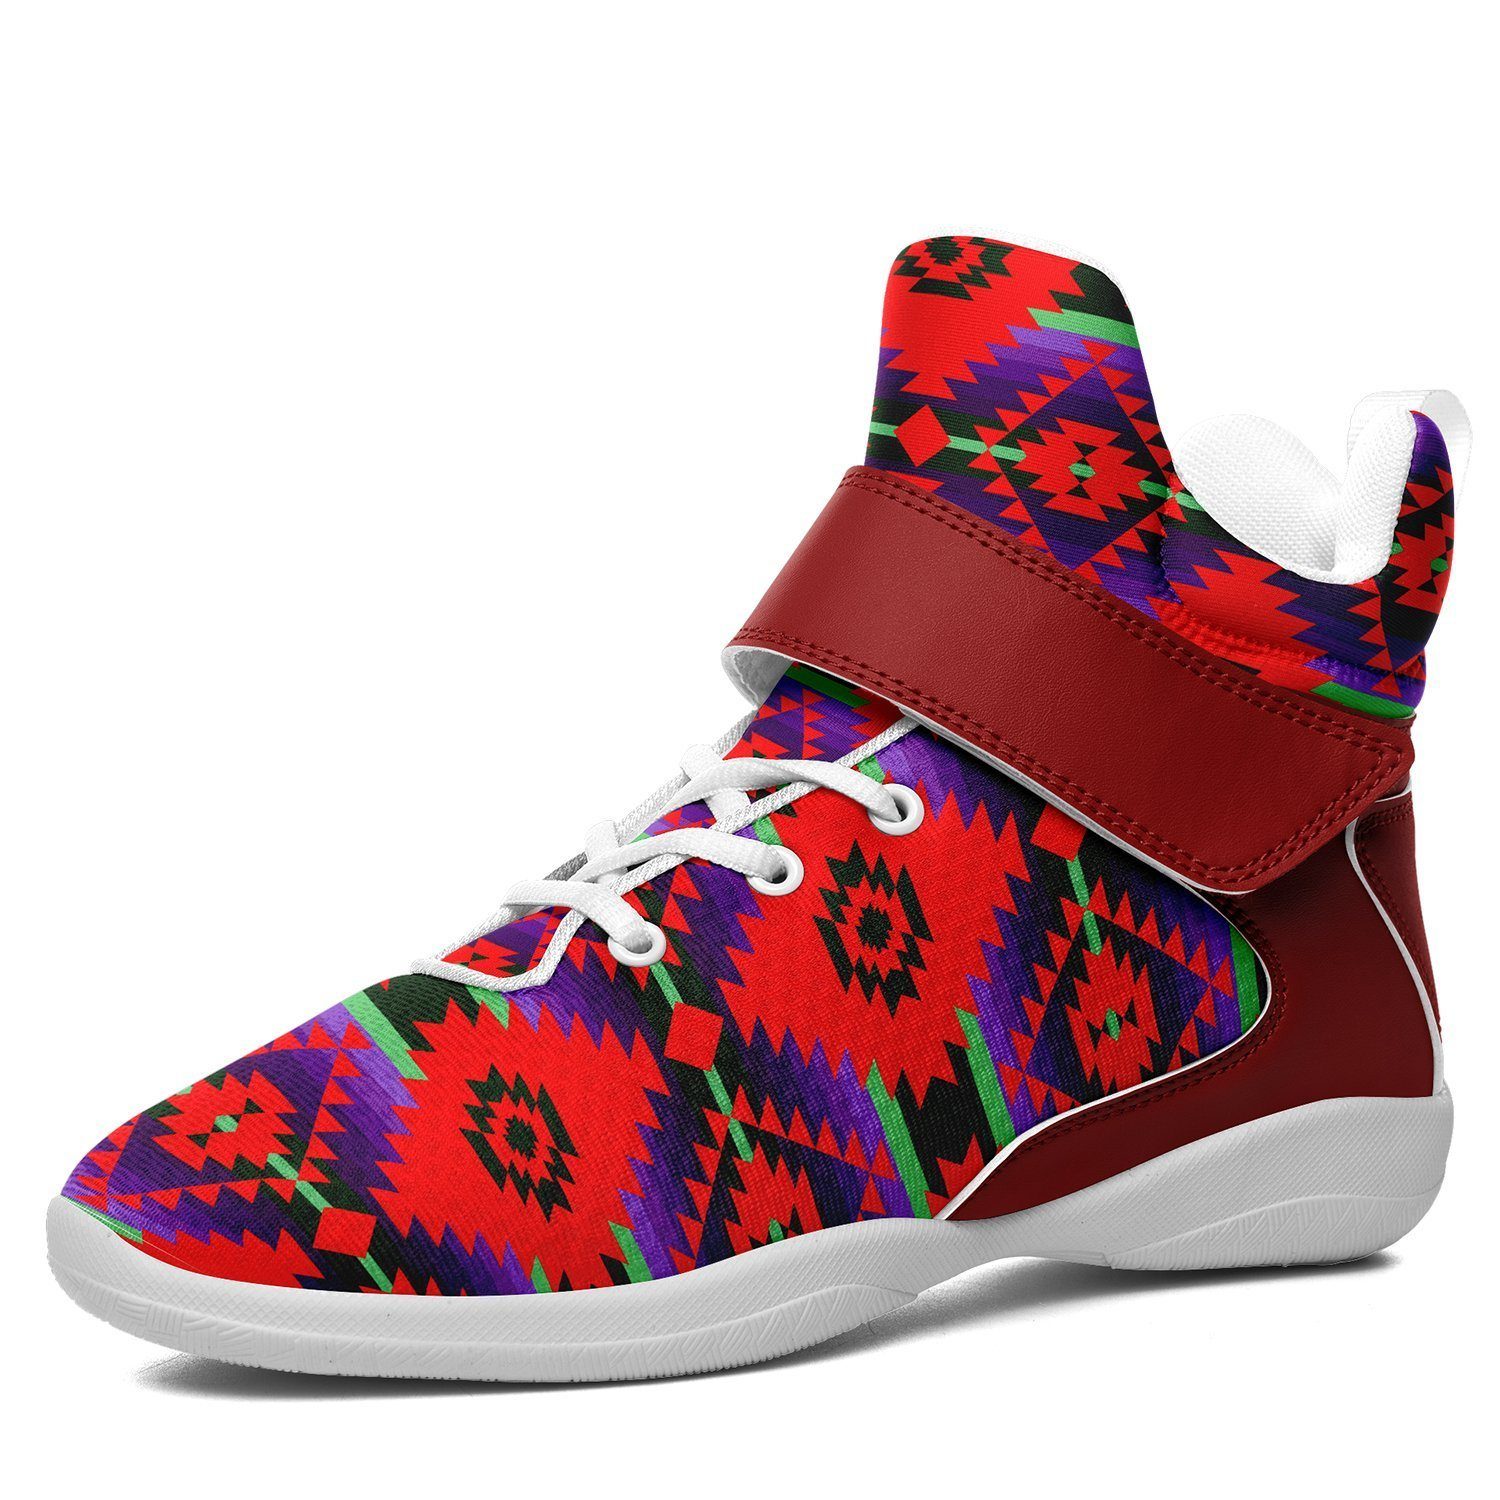 Cree Confederacy Chicken Dance Kid's Ipottaa Basketball / Sport High Top Shoes 49 Dzine US Child 12.5/ EUR 30 White Sole with Red Strap 